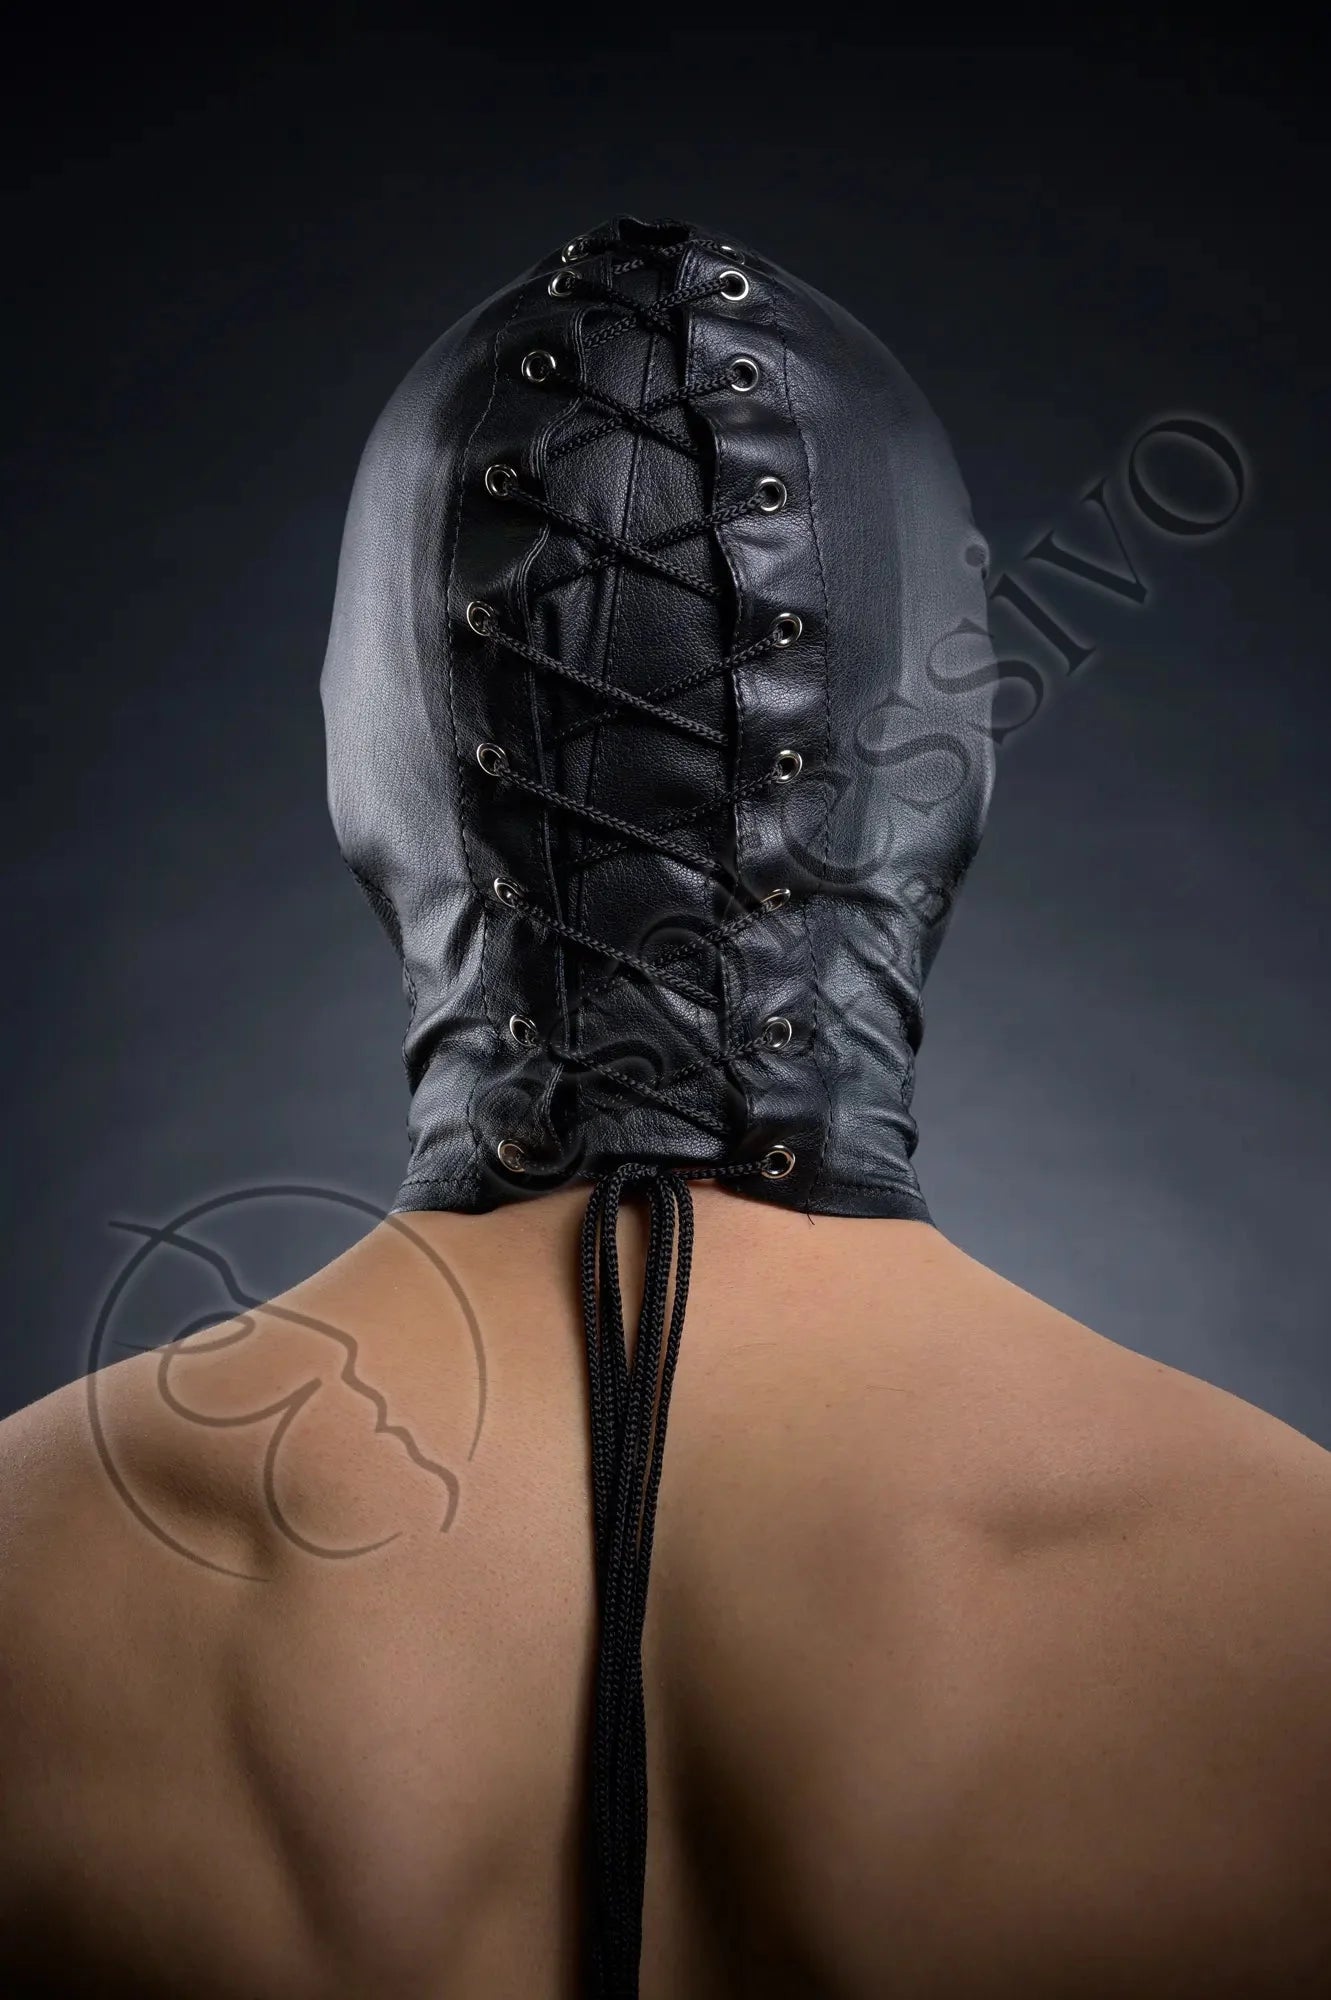 Tight Leather BDSM Hood - Open Eyes & Mouth - Male Model Back